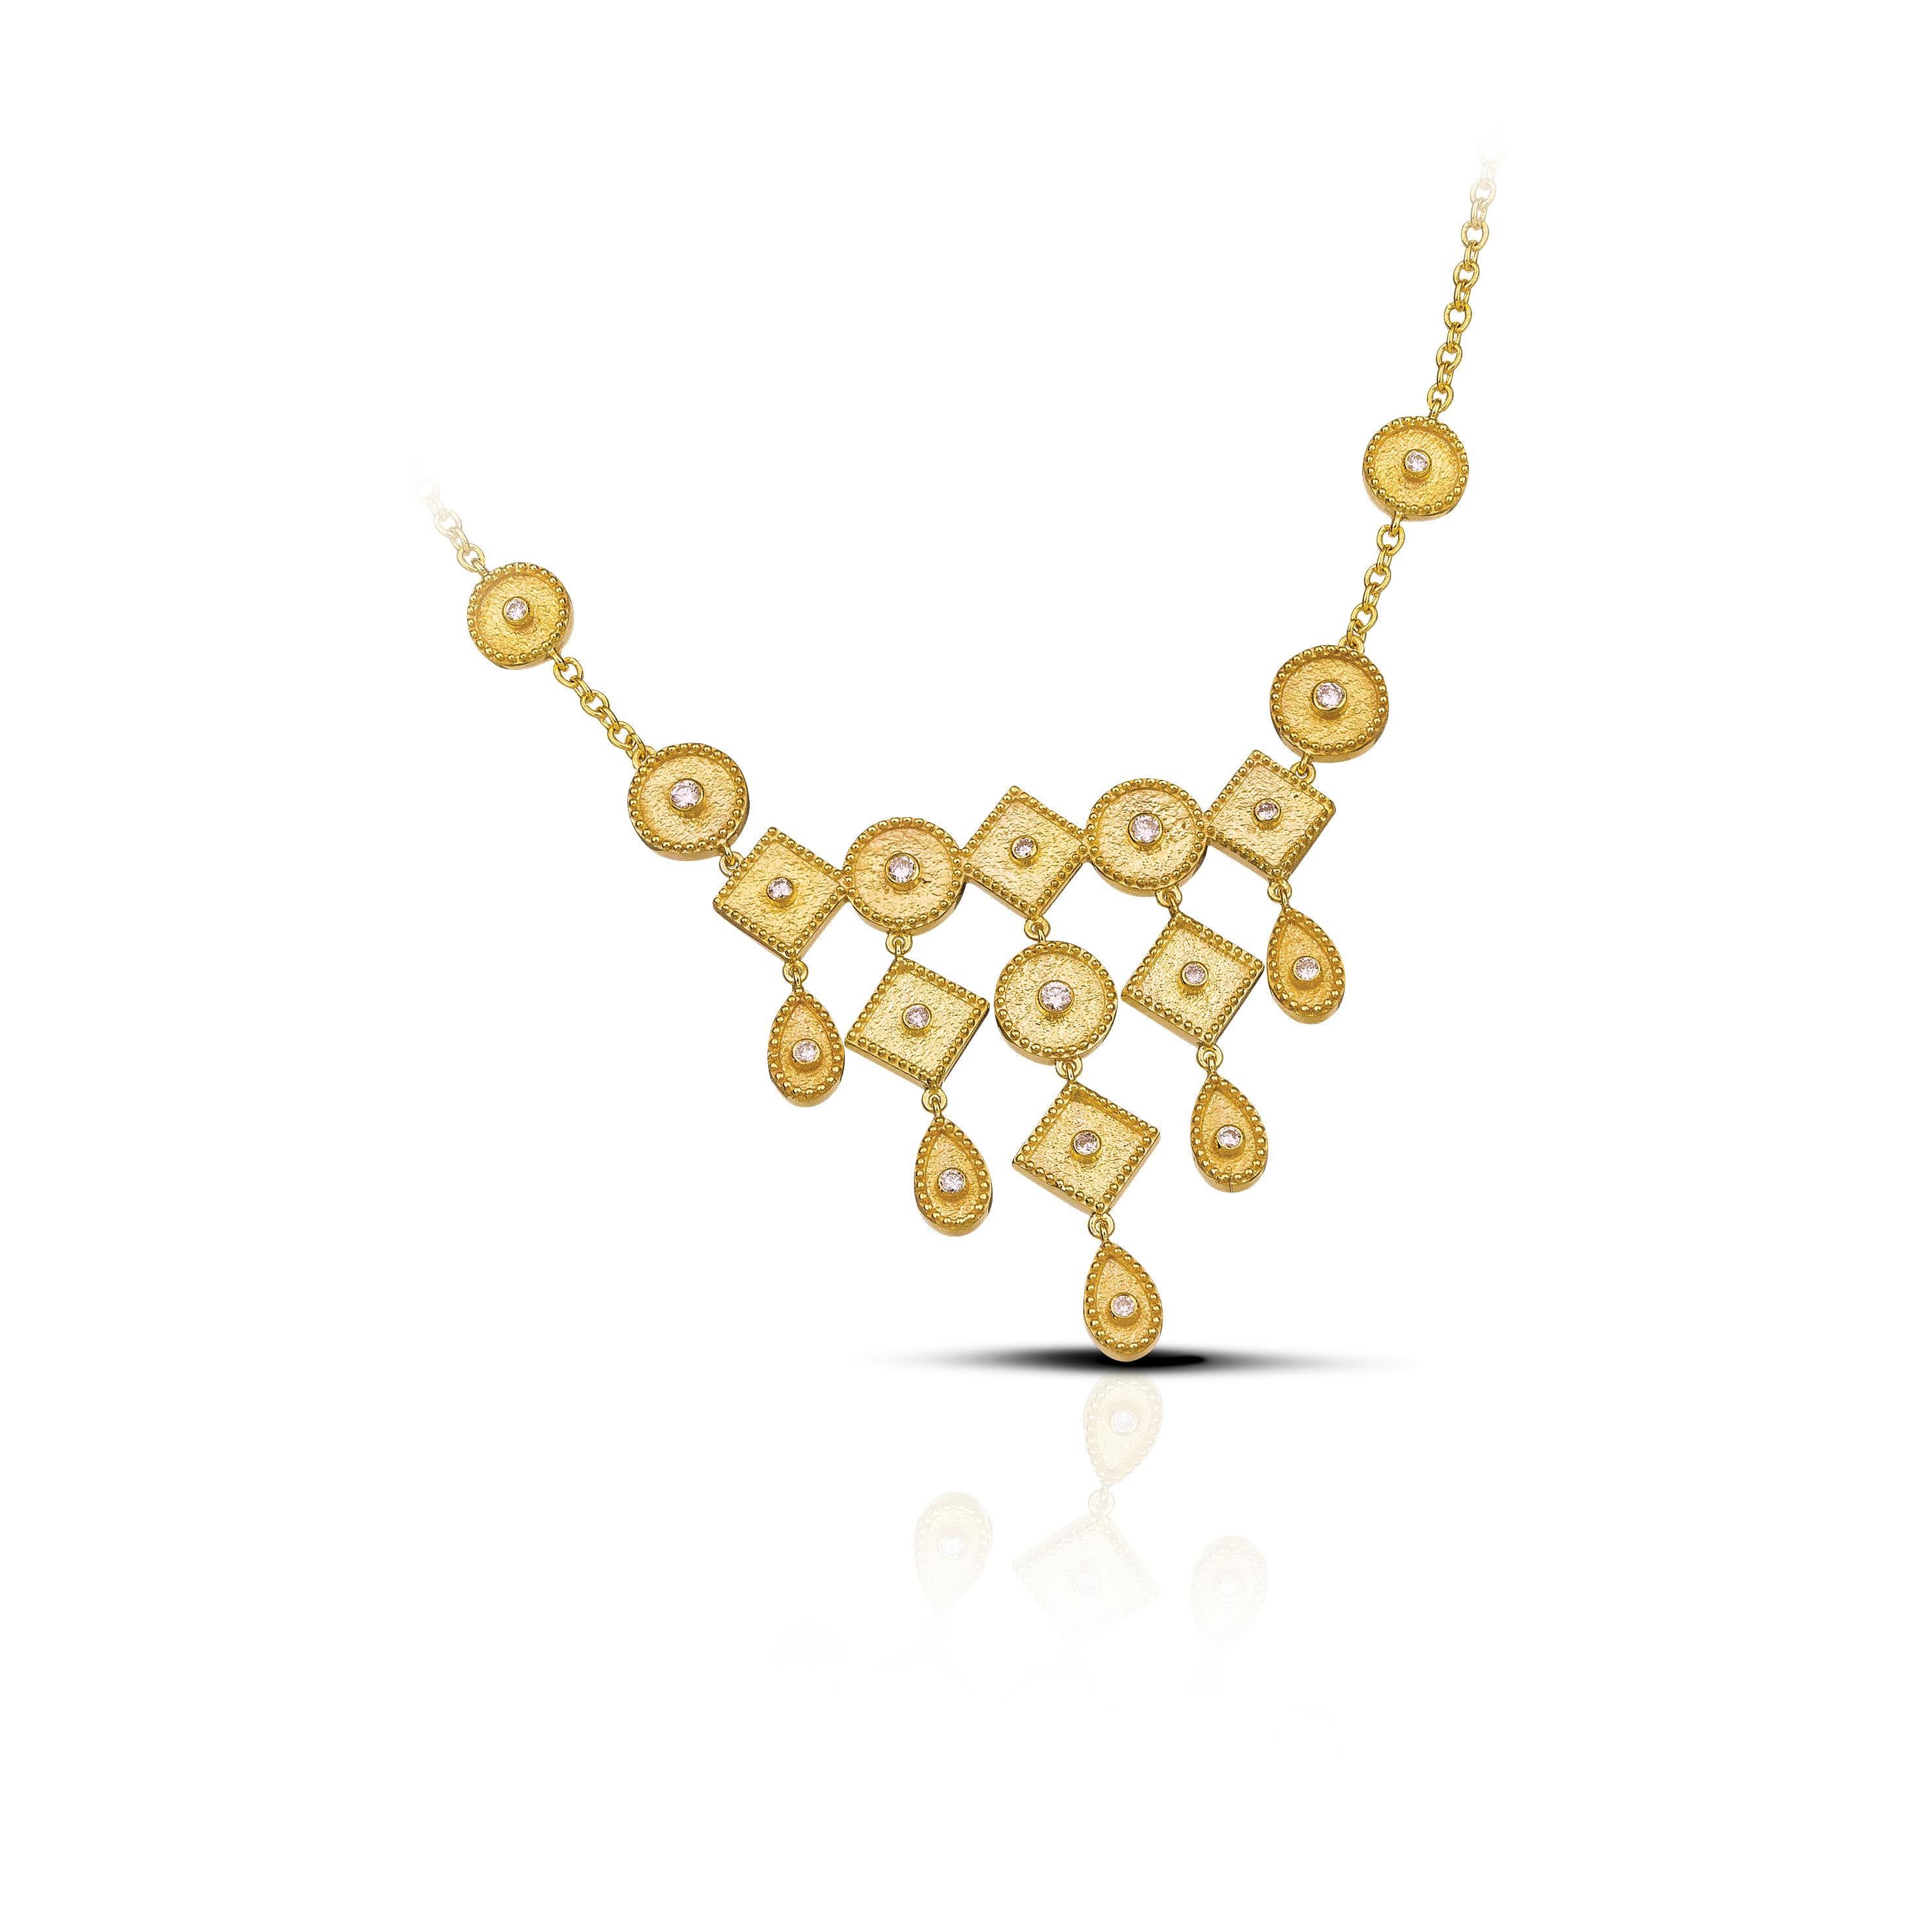 This S.Georgios drop chain necklace is all handmade from solid 18 Karat Yellow Gold and is microscopically decorated with granulation work all the way around. The background of the necklace has a unique byzantine finish and features 18 individual